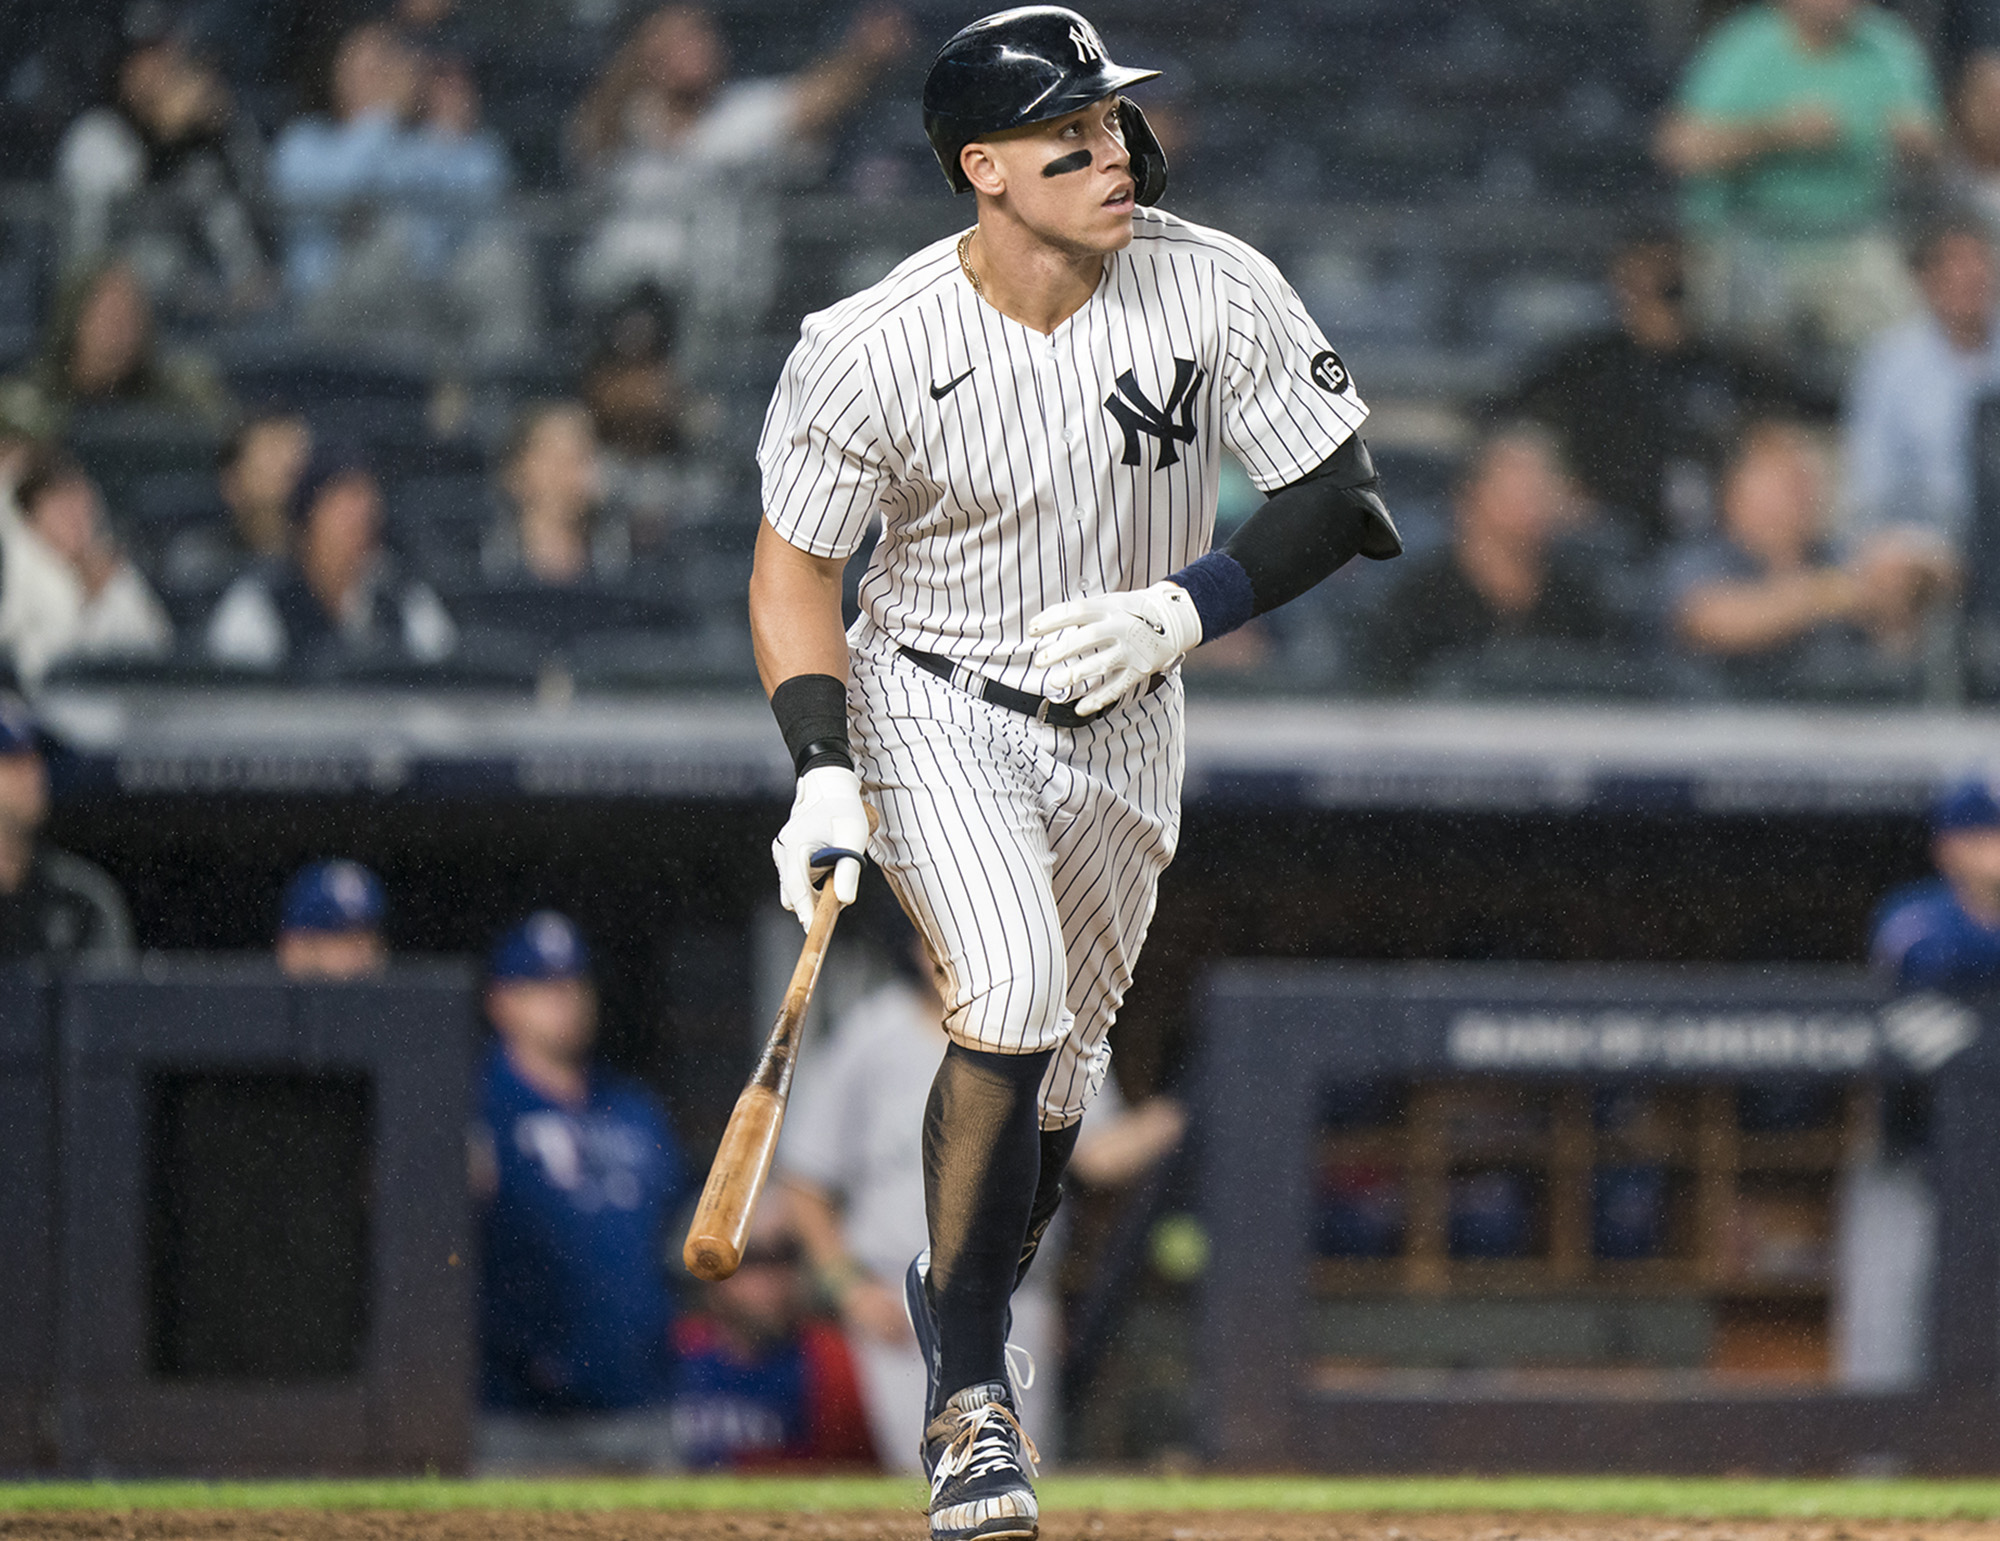 Aaron Judge hits a home run for the Yankees on Sept. 21, 2021.